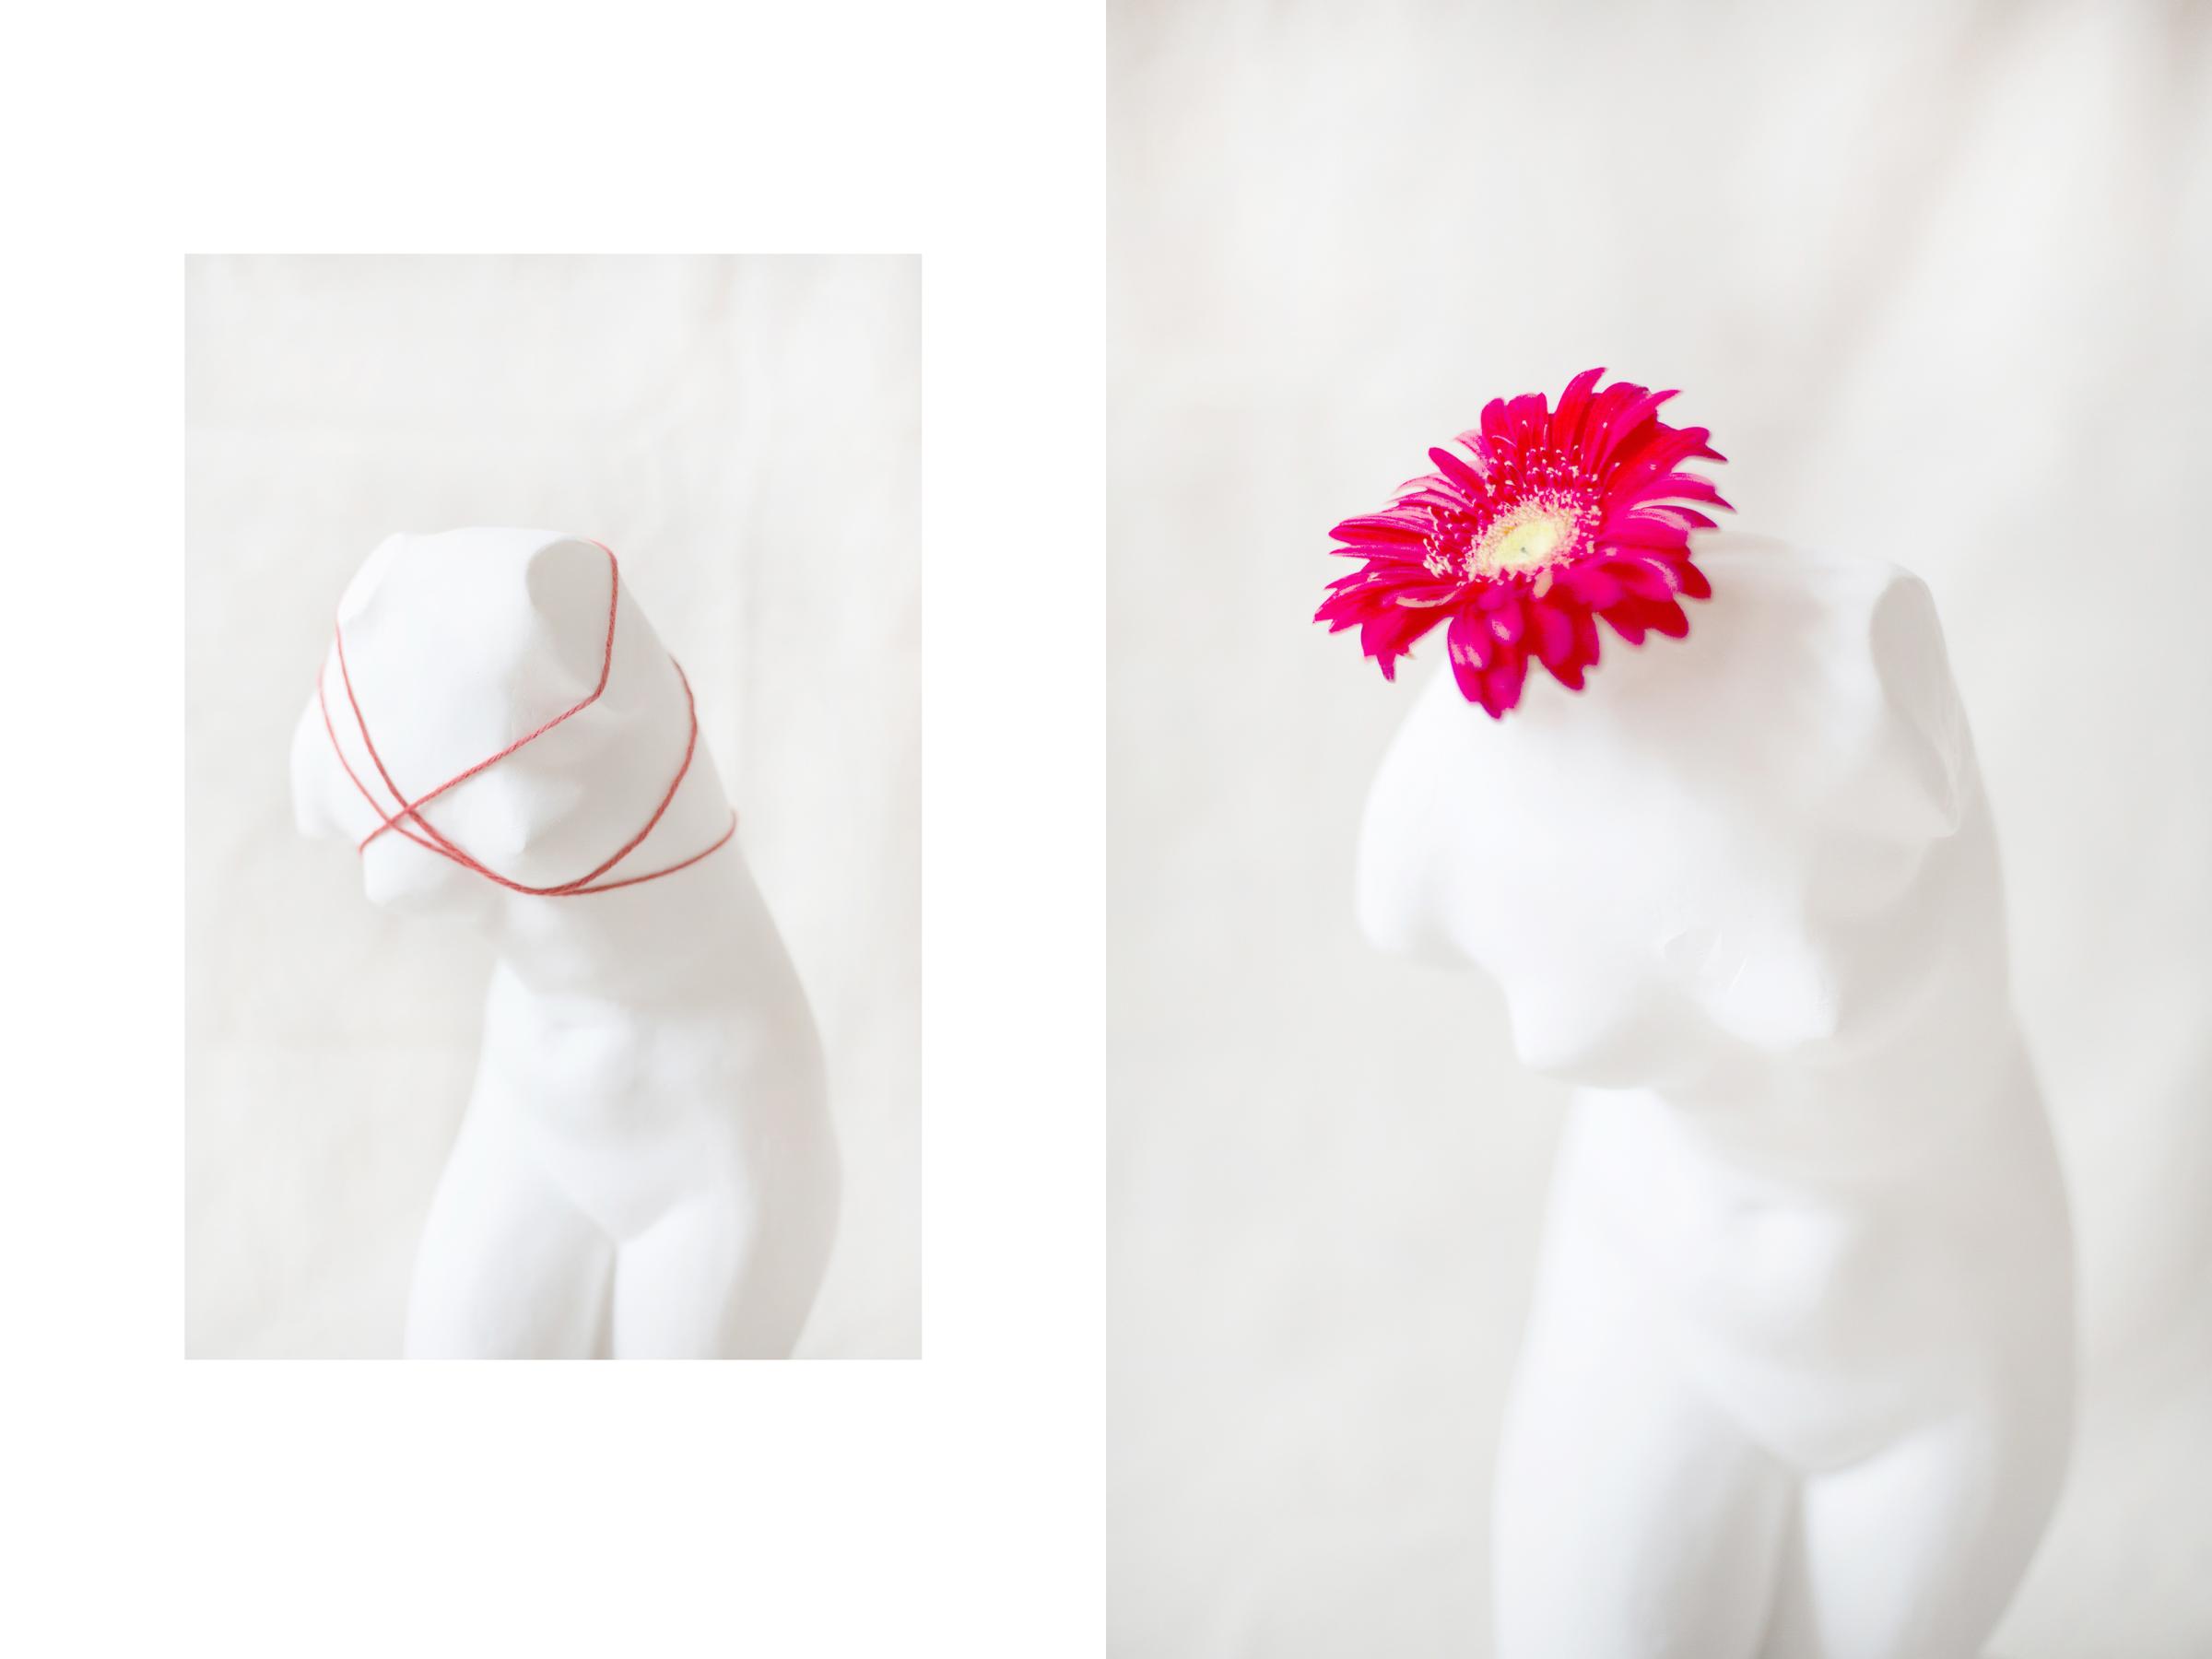 Am I Not Scared Anymore? - Torso with red threads and a flower which Tatiana saw in...